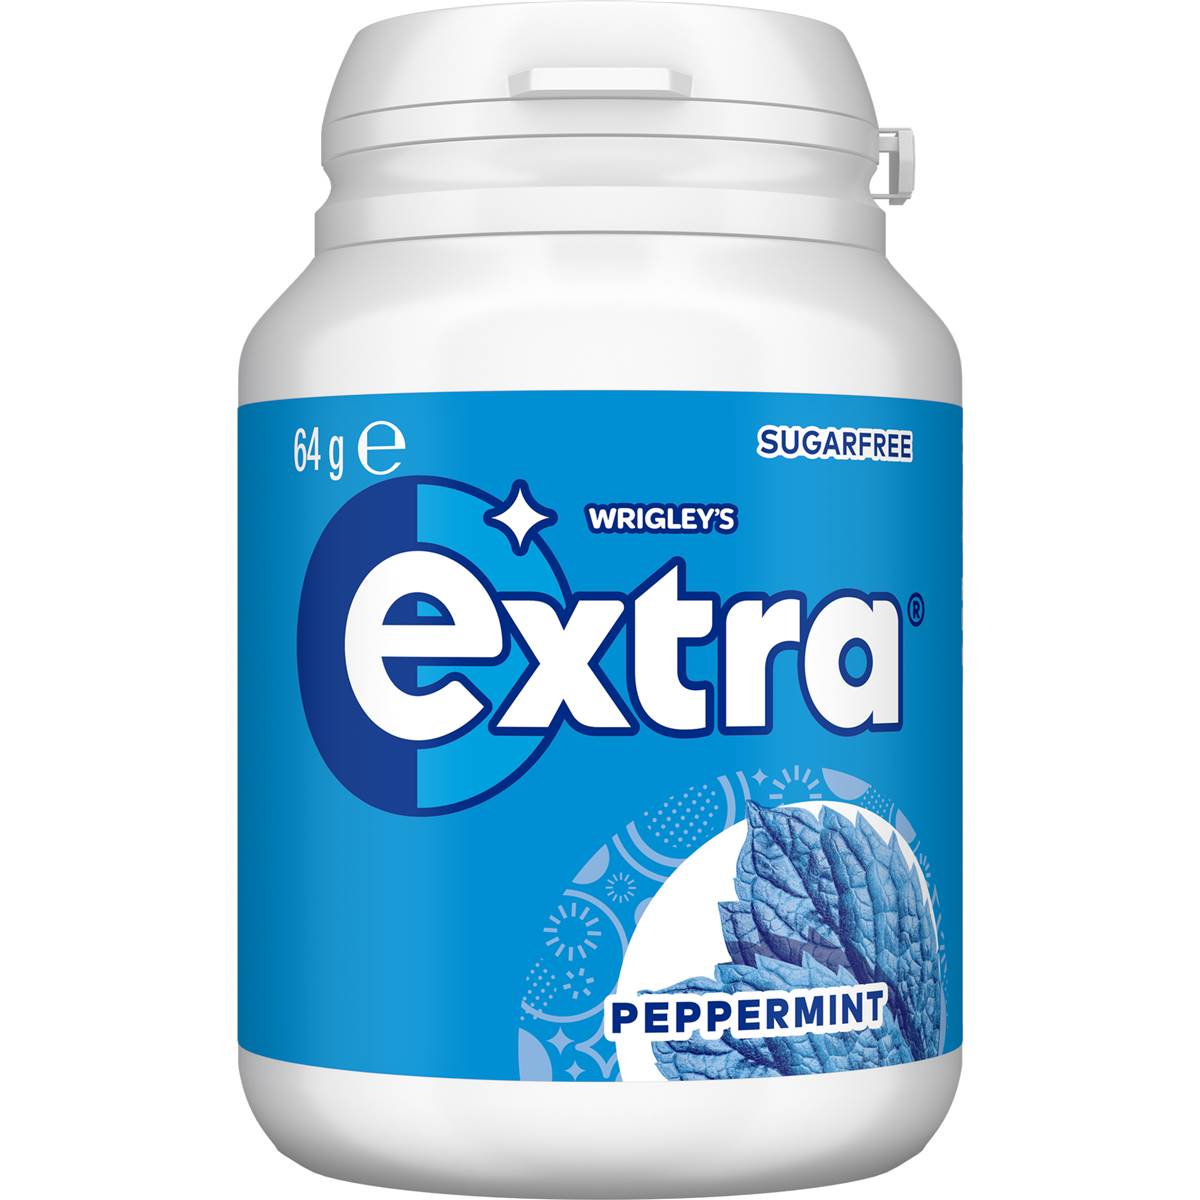 Calories in Extra Peppermint Sugar Free Chewing Gum Bottle